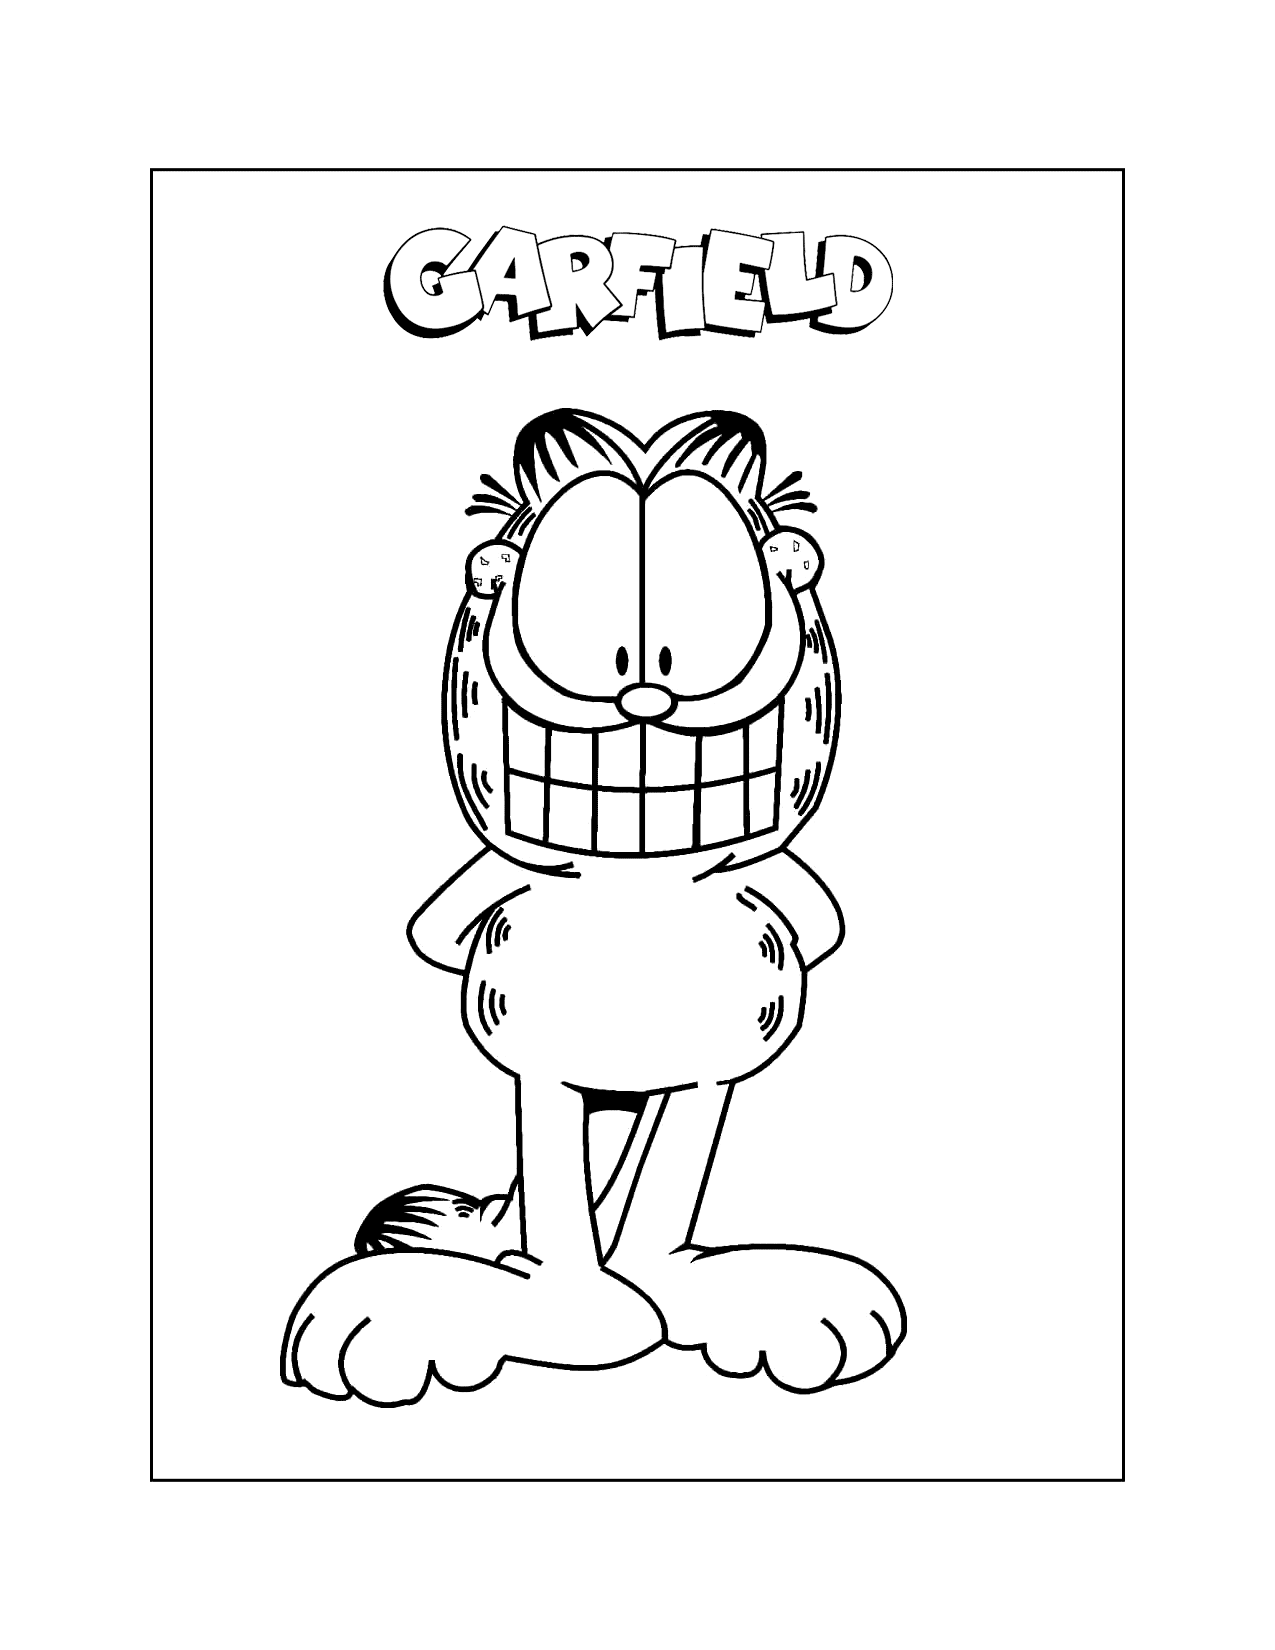 Garfield With A Big Smile Coloring Page